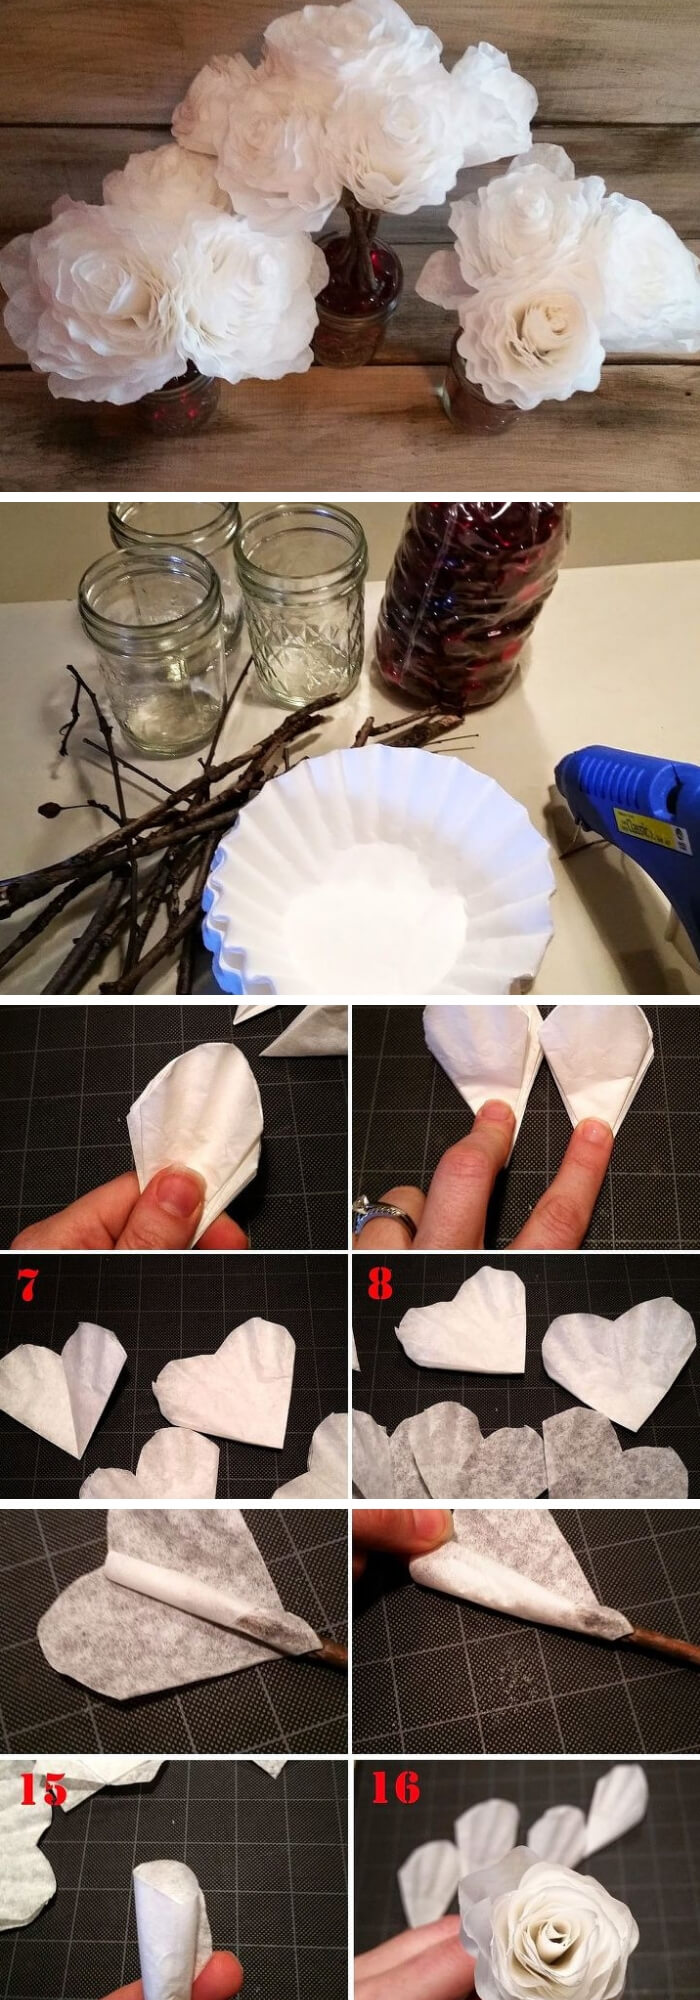 Upcycled Coffee Filter Flowers | Environmentally-Friendly Valentine's Day Gifts